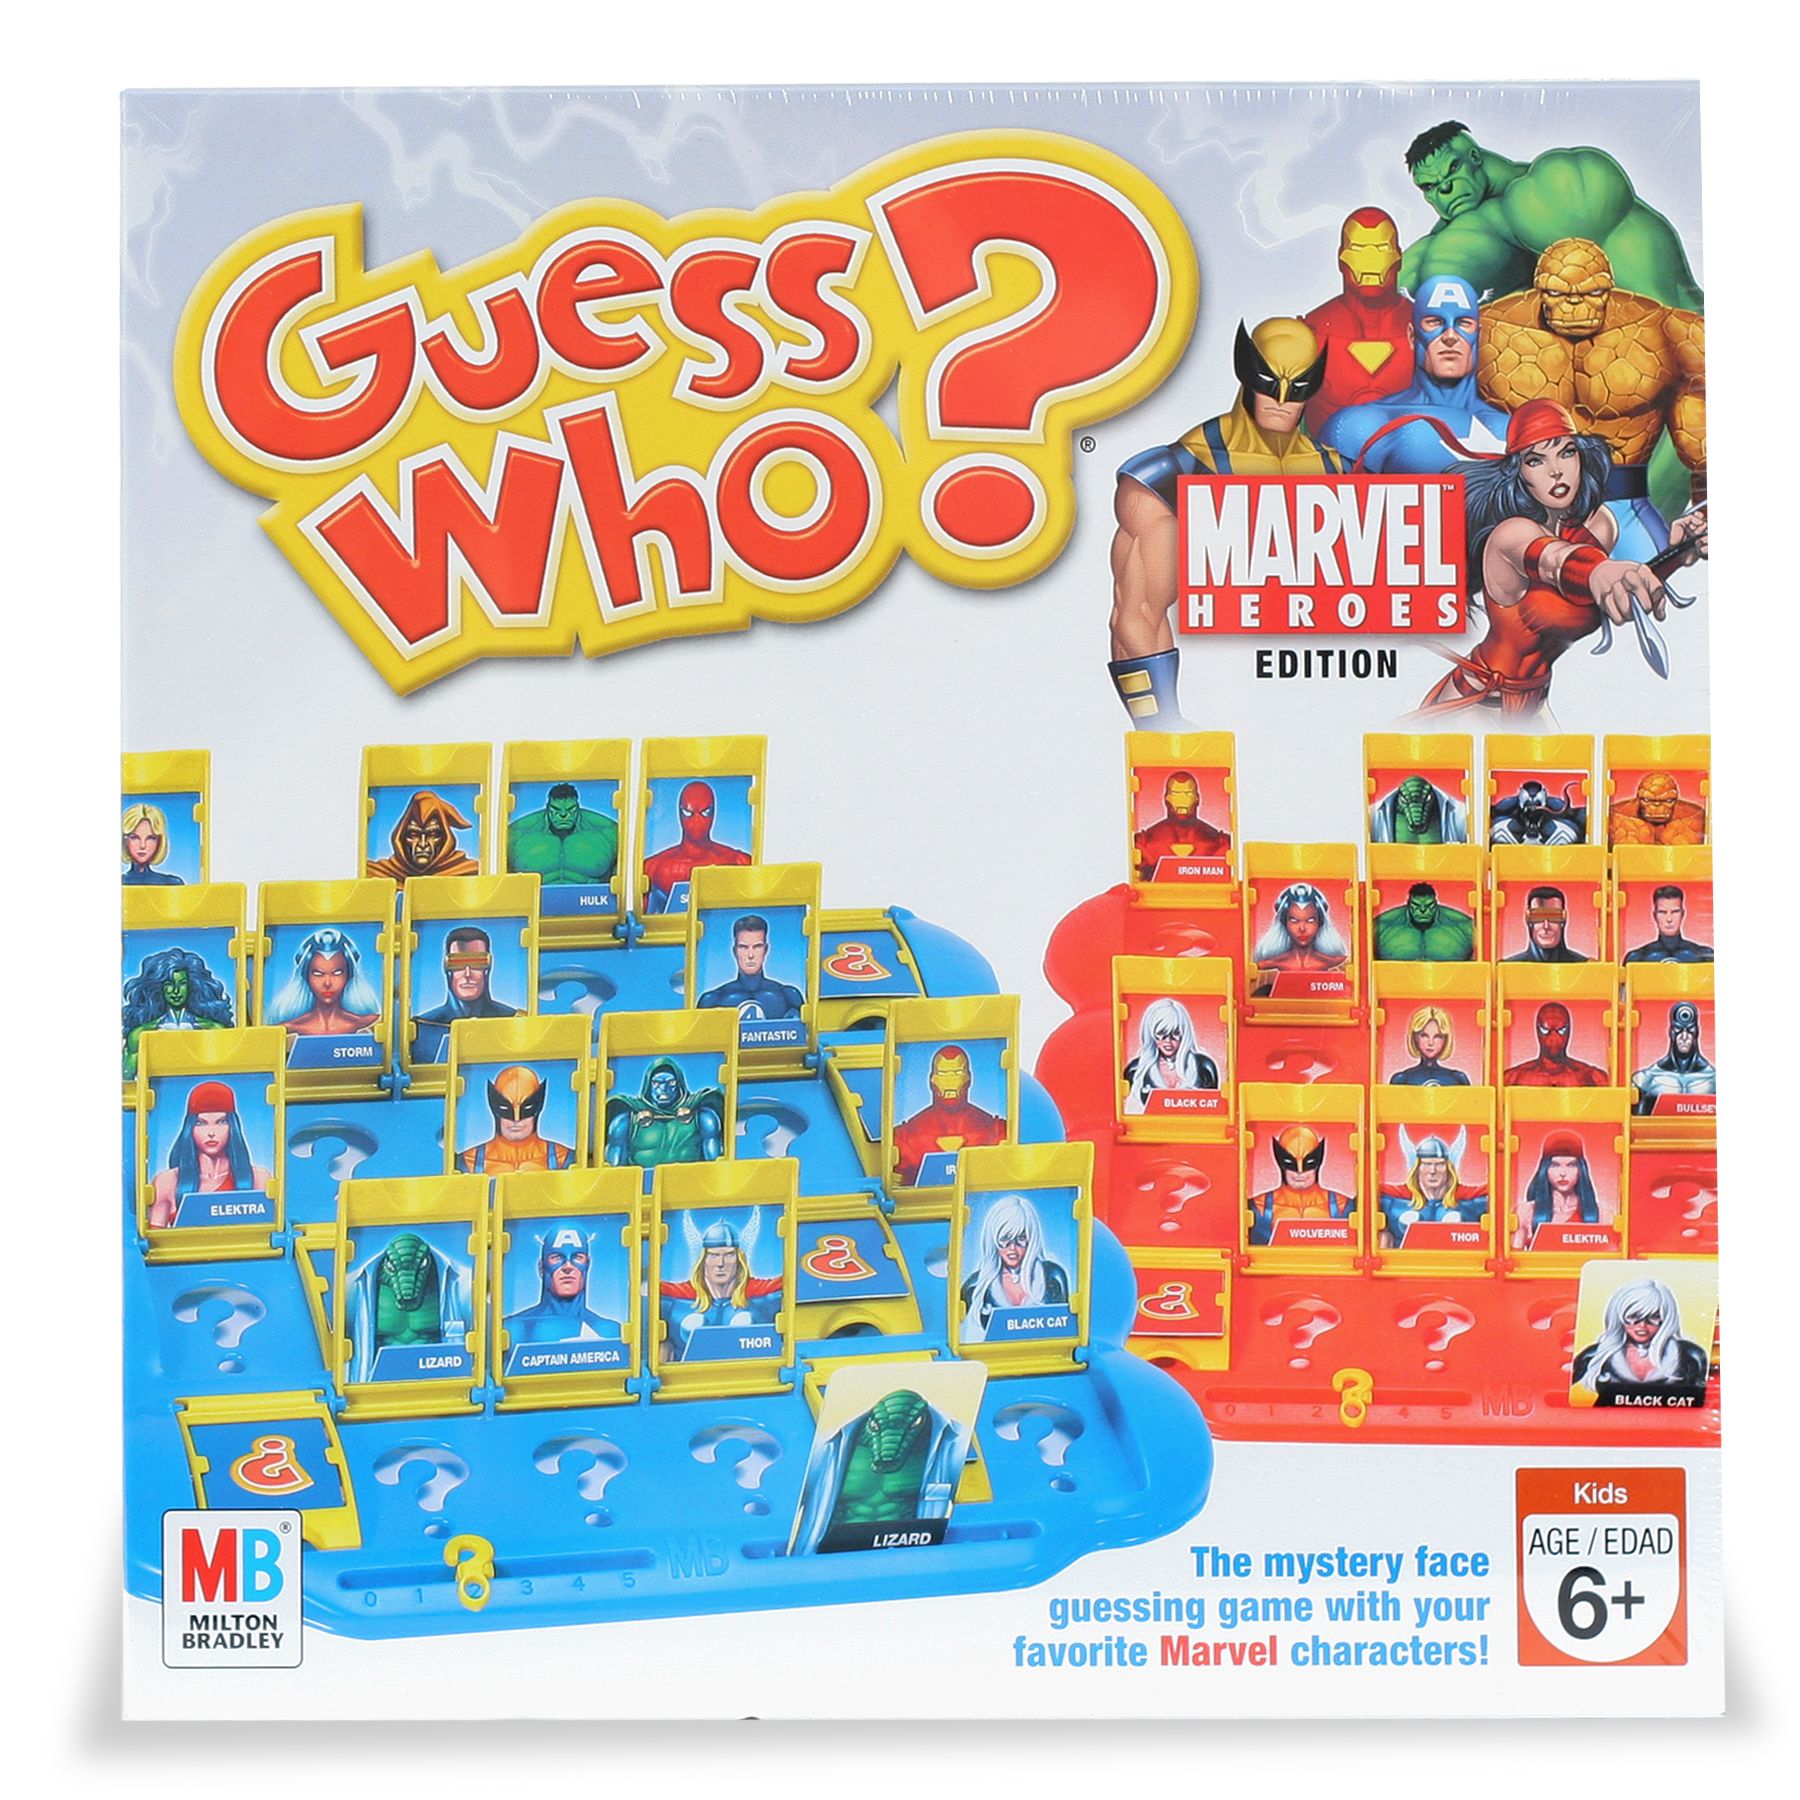 Milton Bradley Guess Who? Marvel Edition Toys & Games